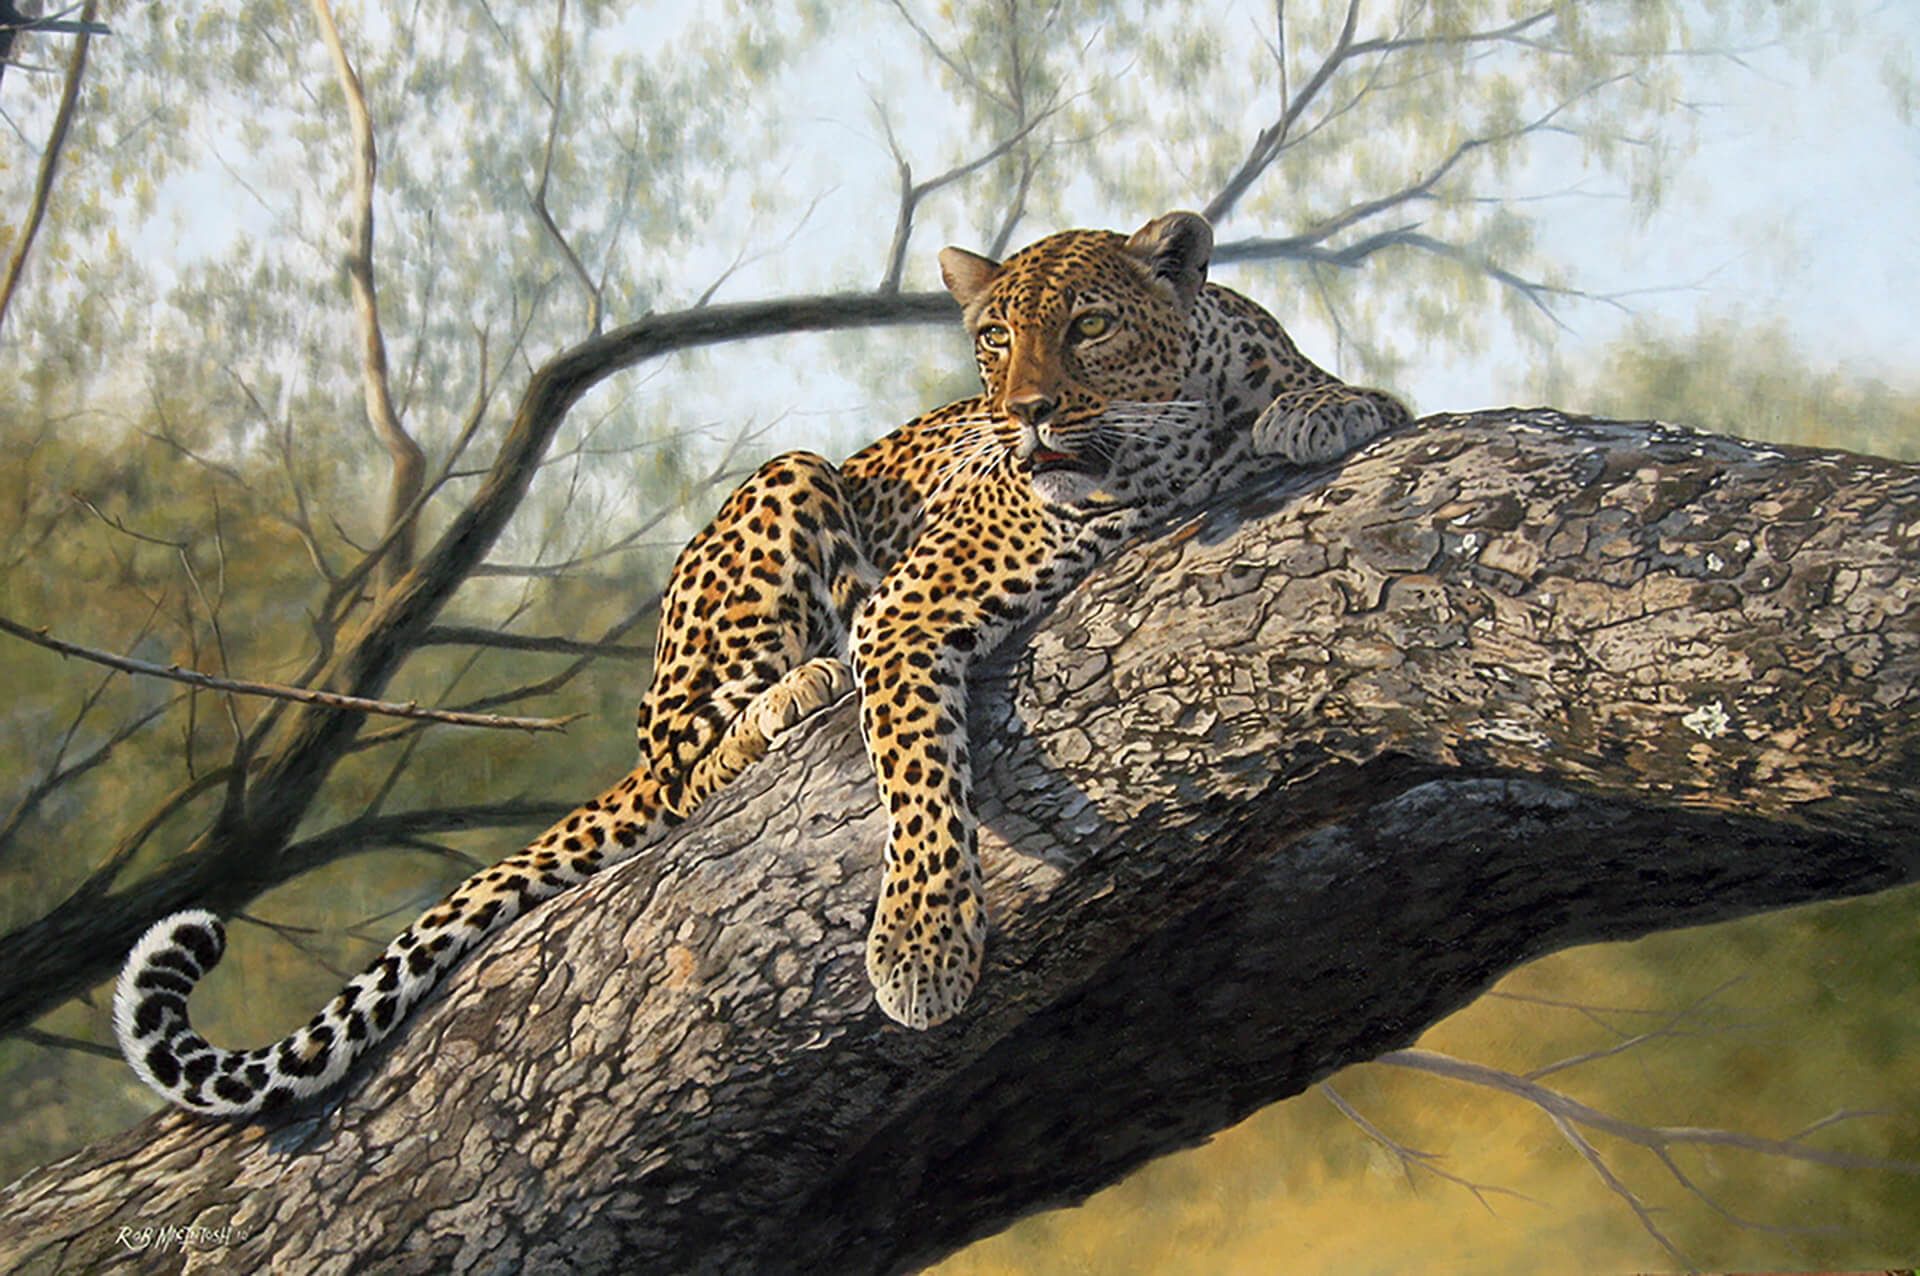 Photorealistic painting of a jaguar laying on the branch of a tree